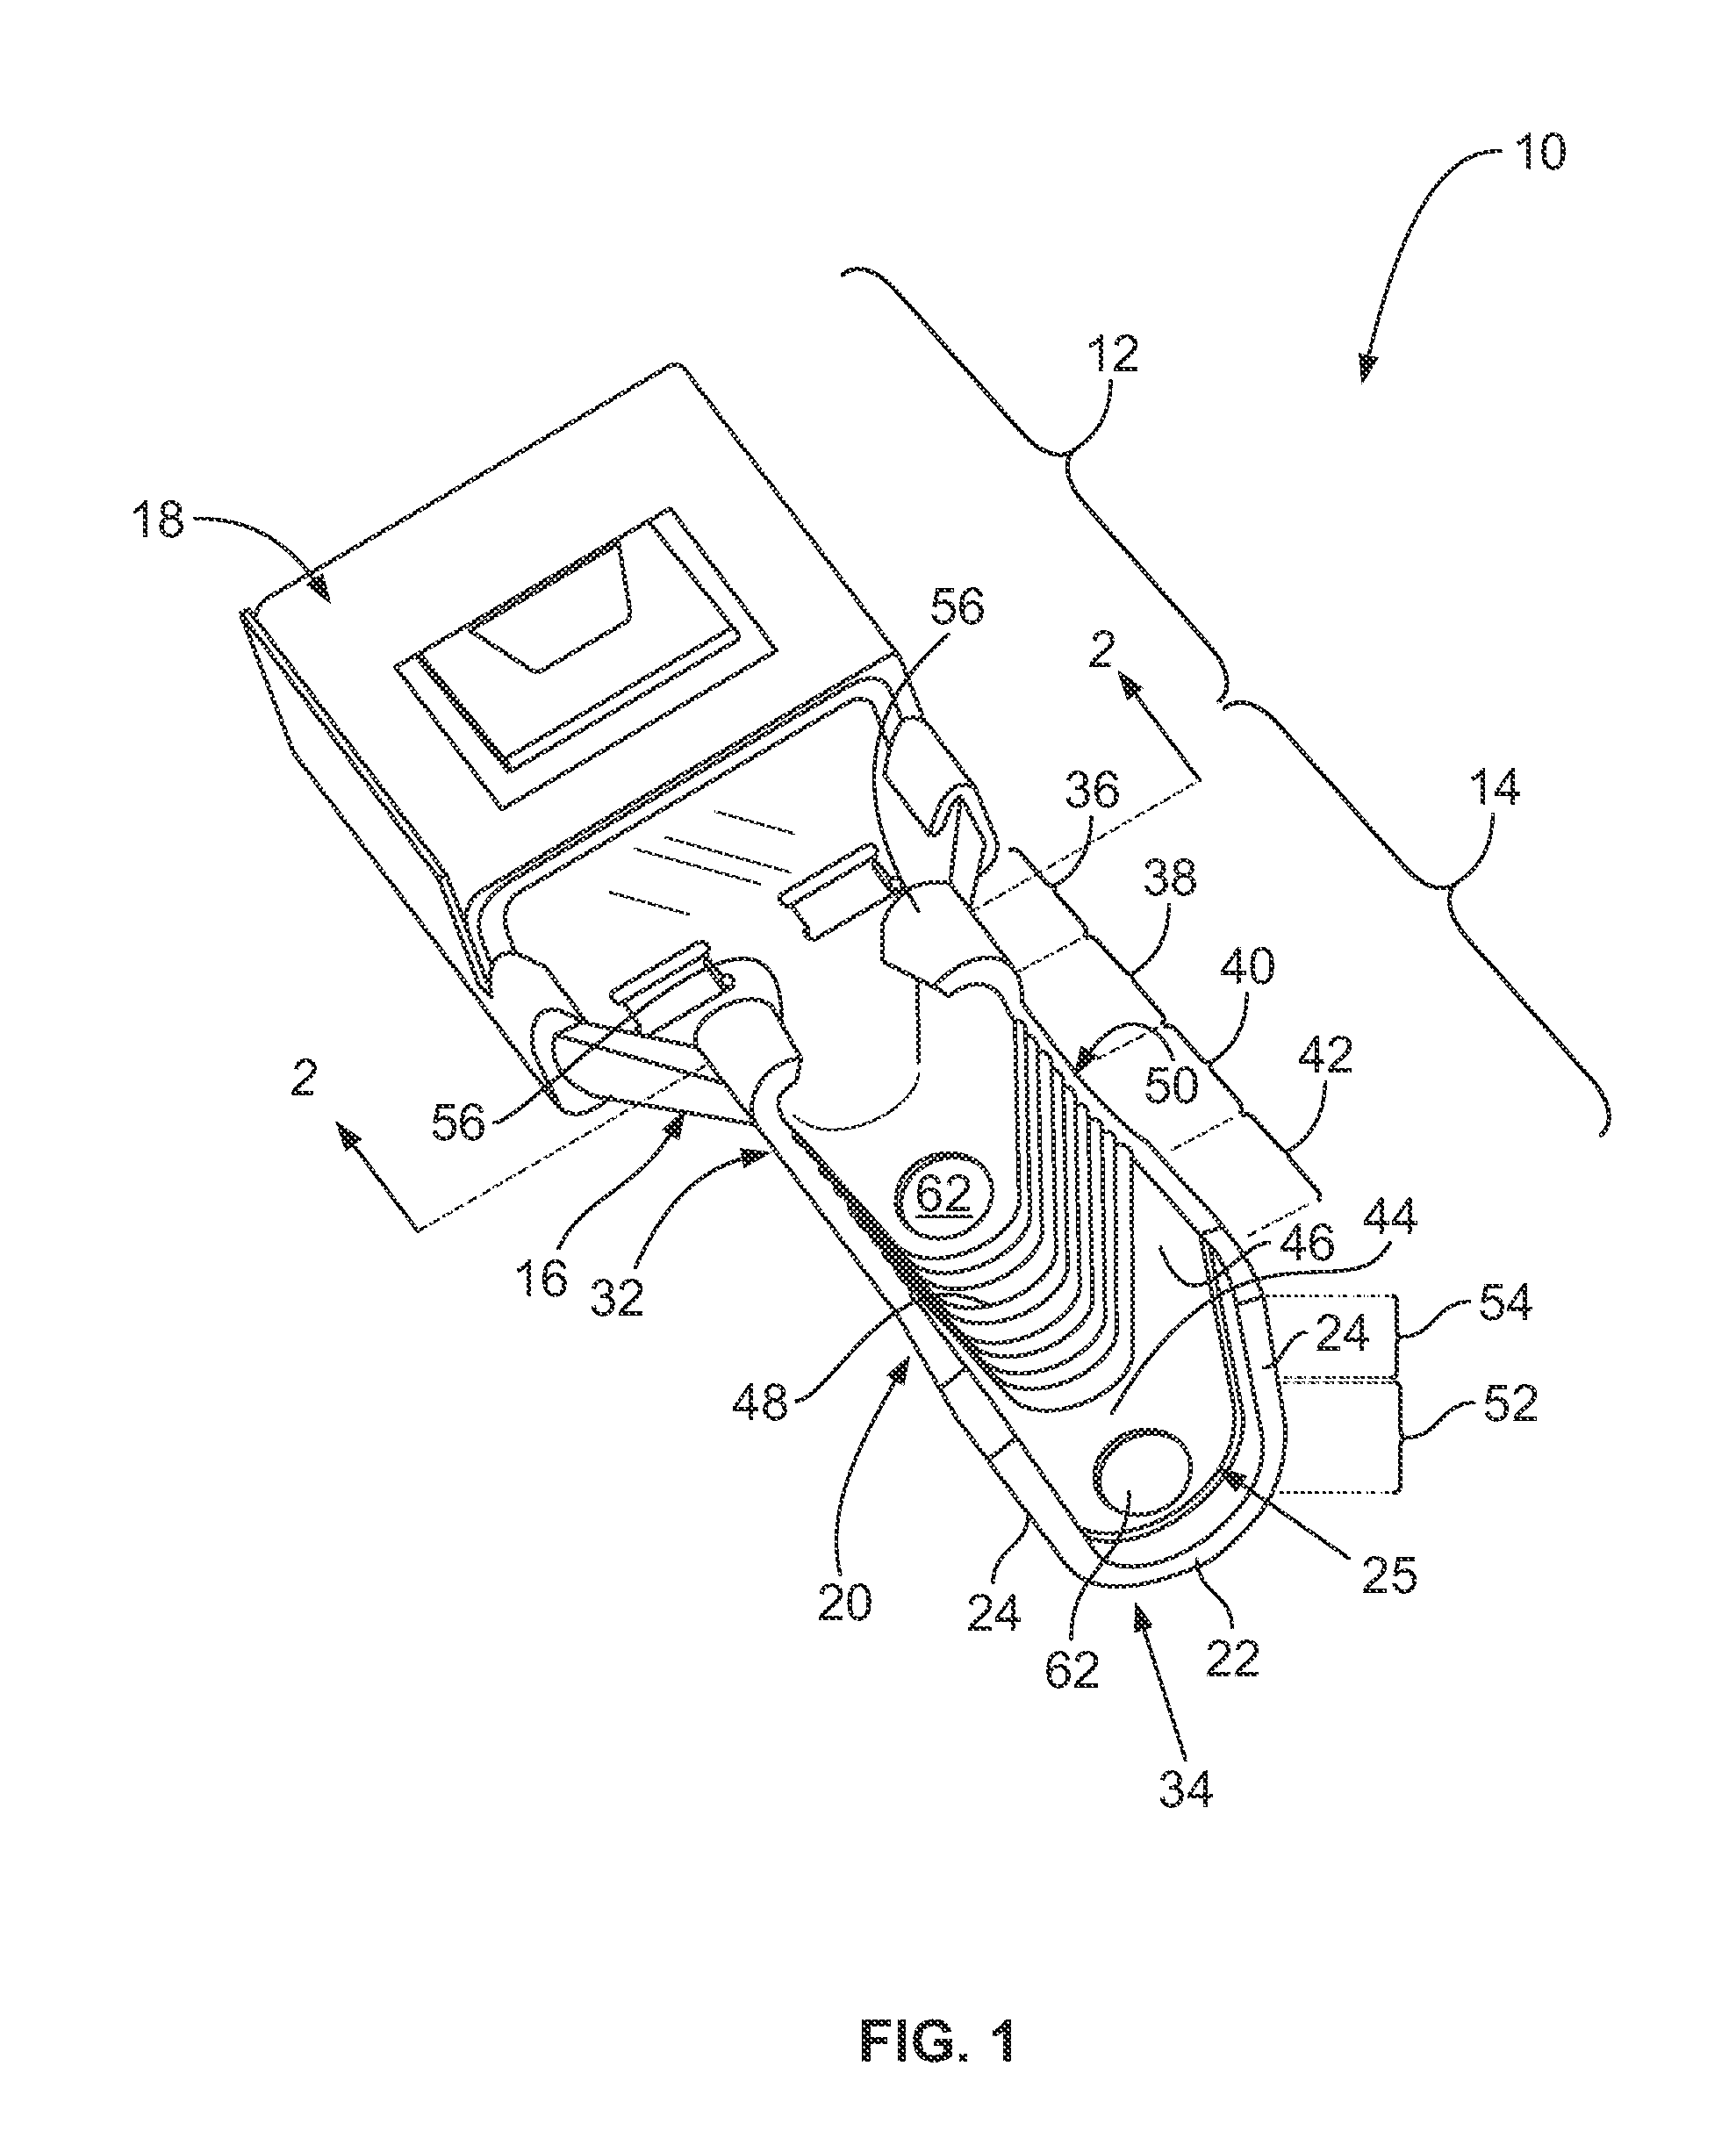 Electrical terminal for terminating a wire